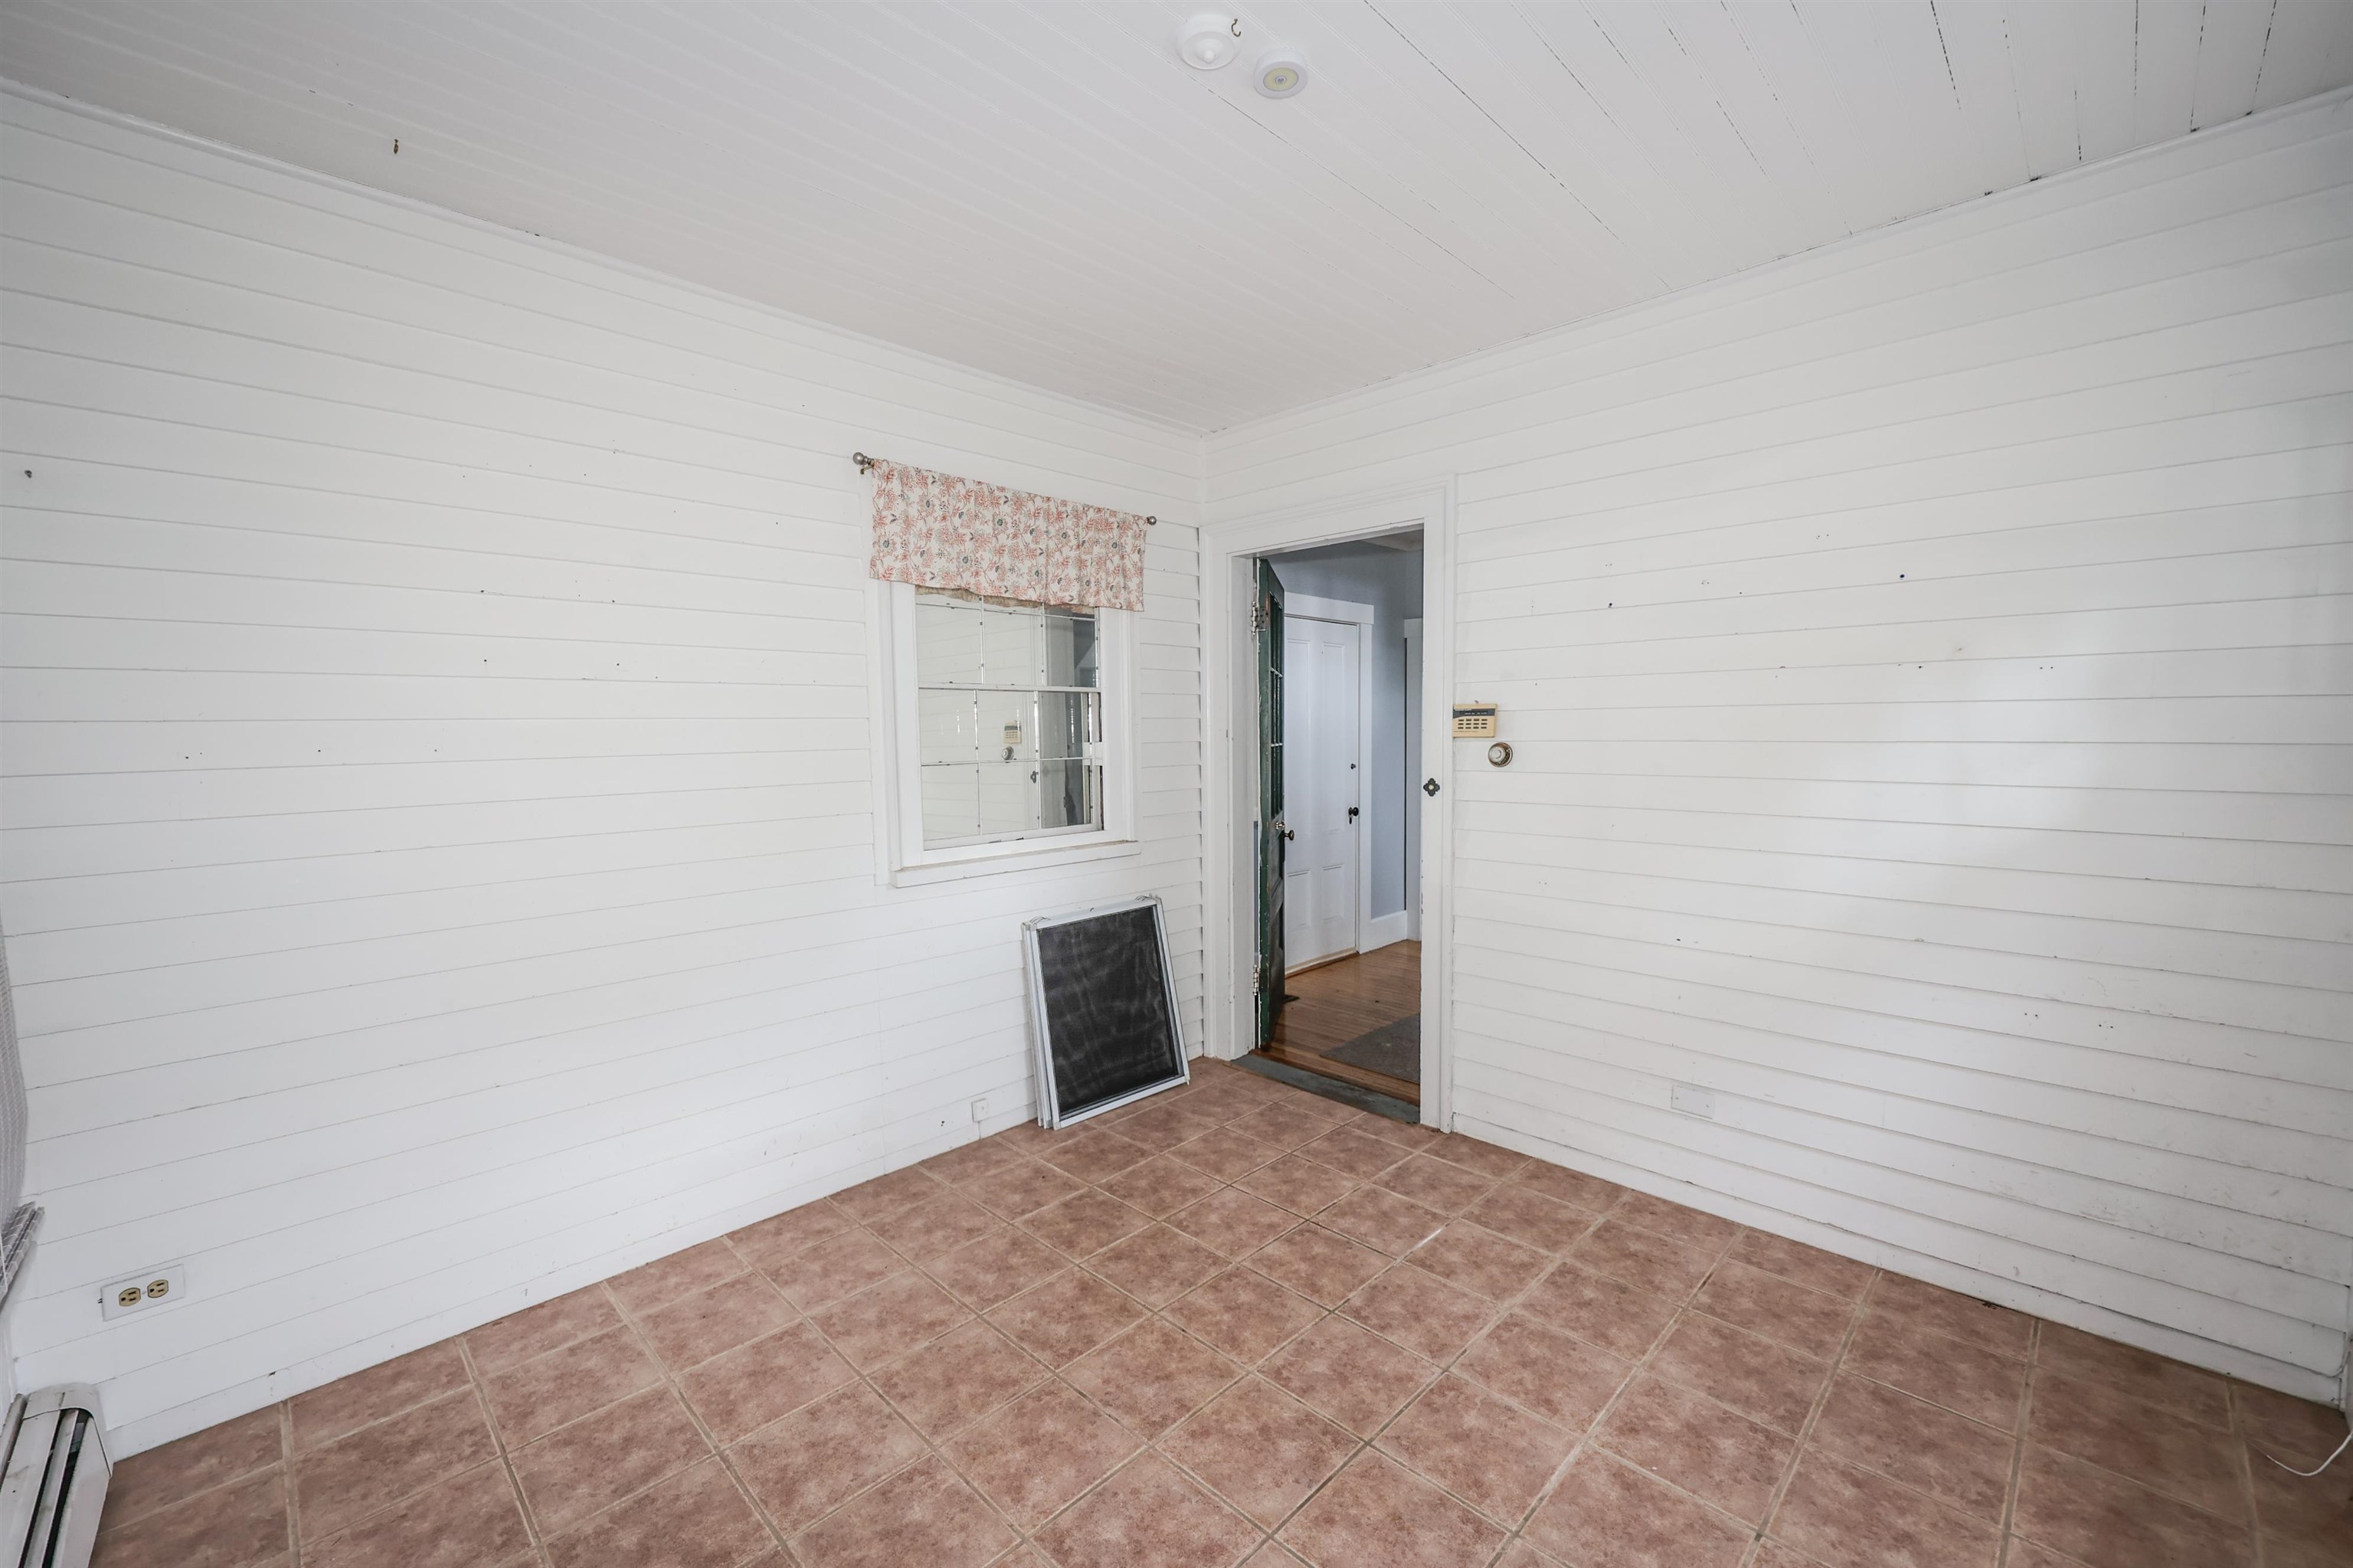 Unit A - 3 season porch / mudroom located on the 1st floor